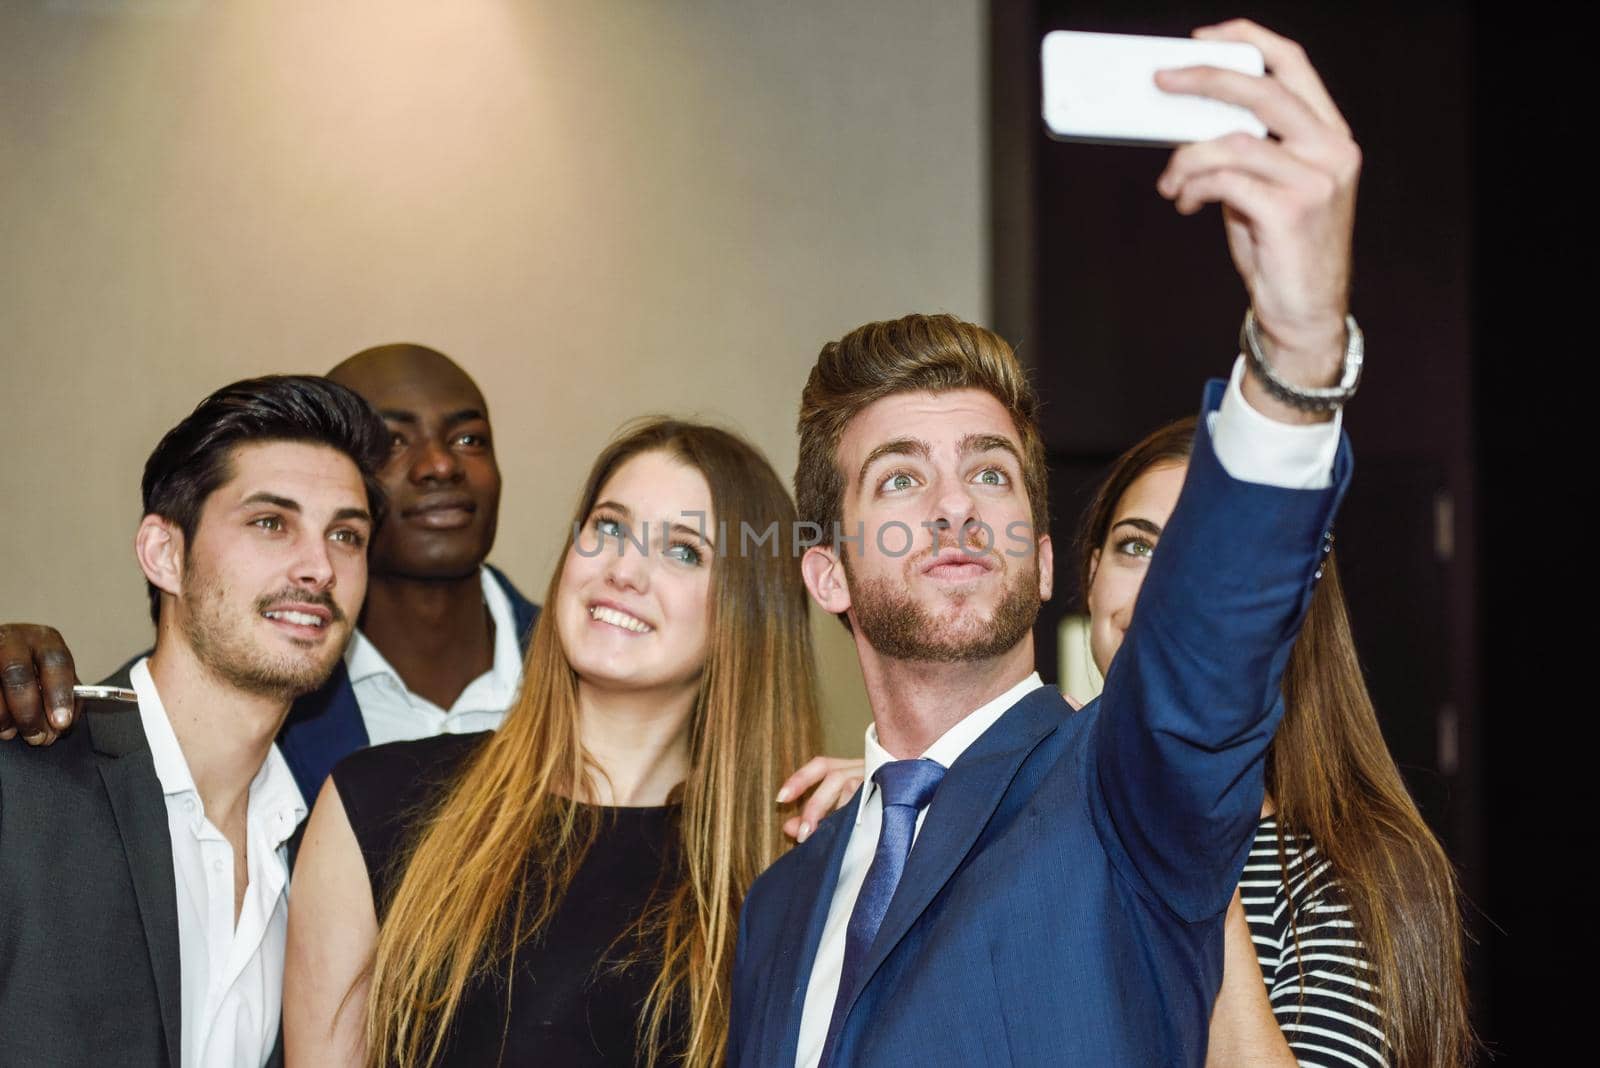 Group of multi-ethnic businesspeople taking a picture themselves with a mobile phone after a business meeting